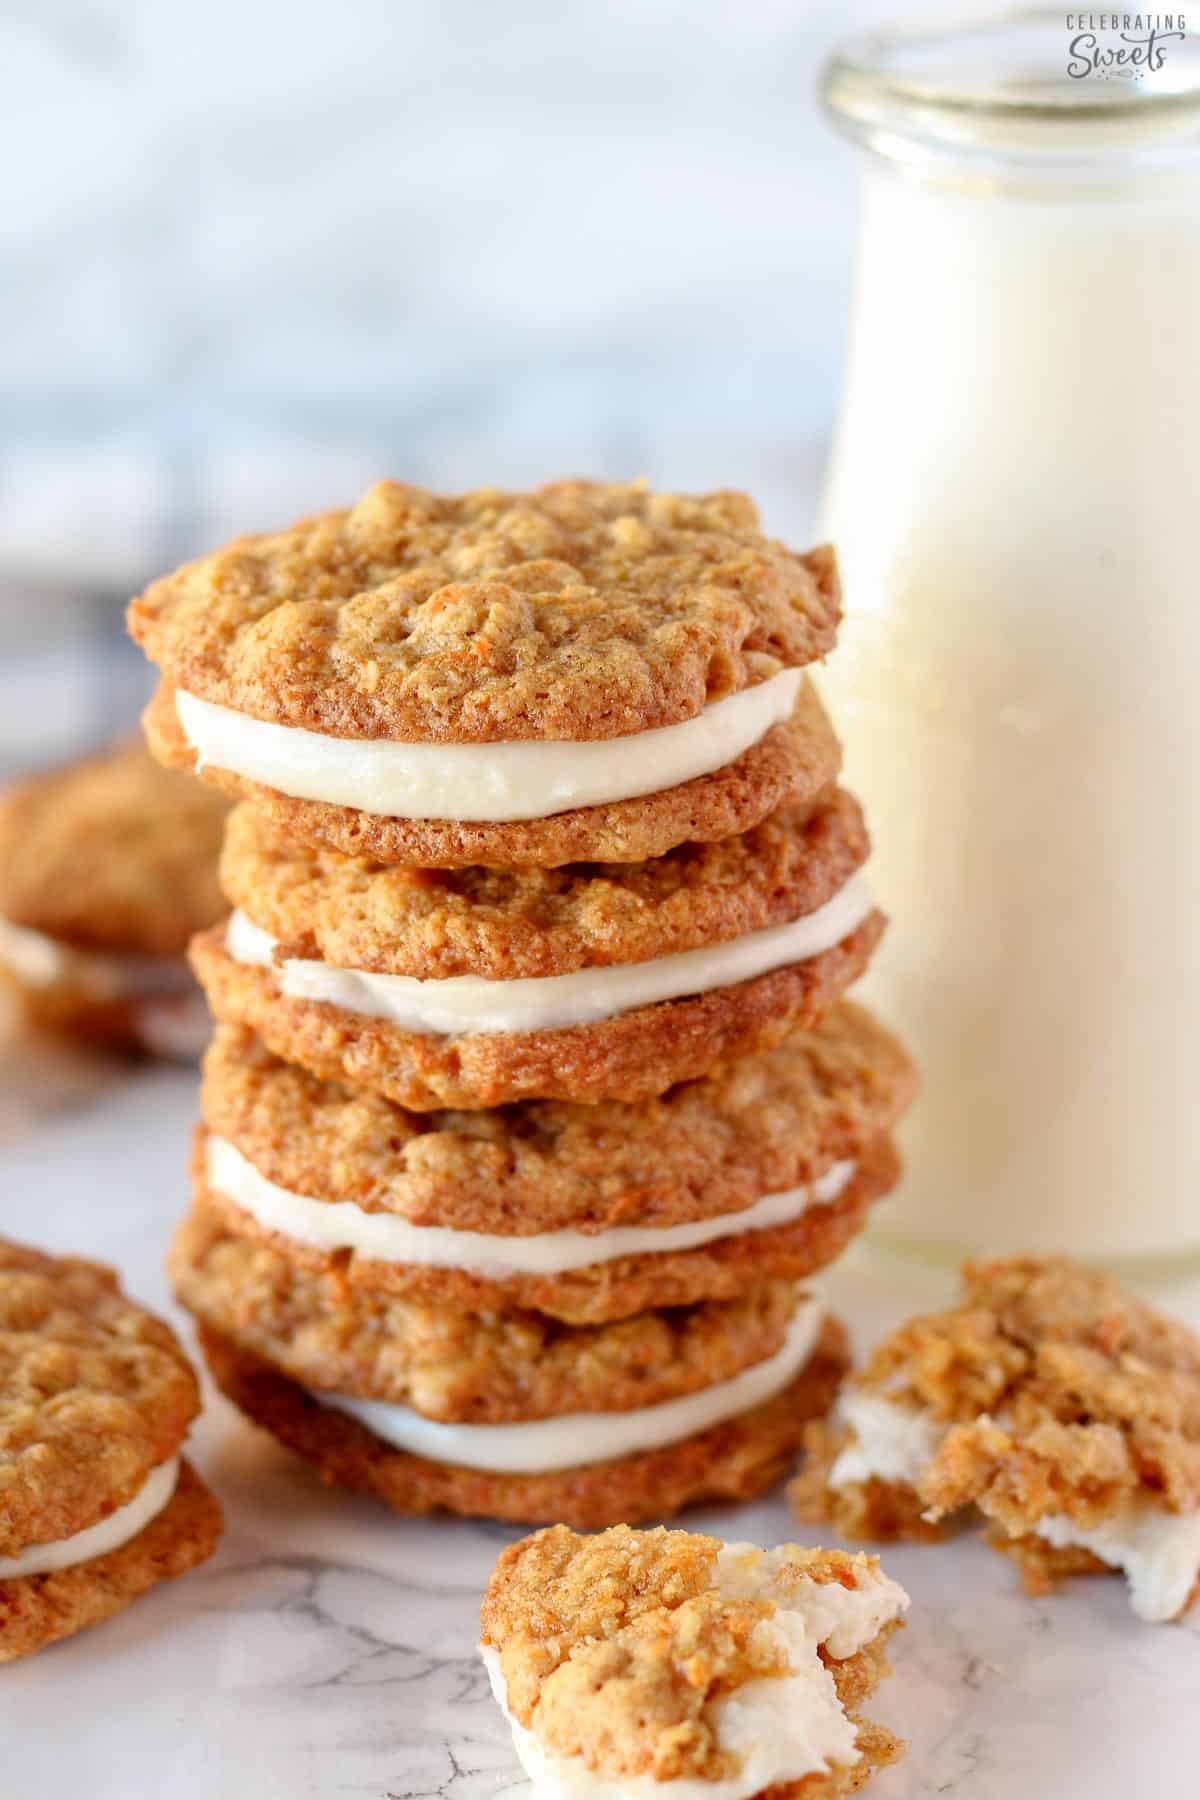 Stack of carrot cake cookies next to a glass of milk.